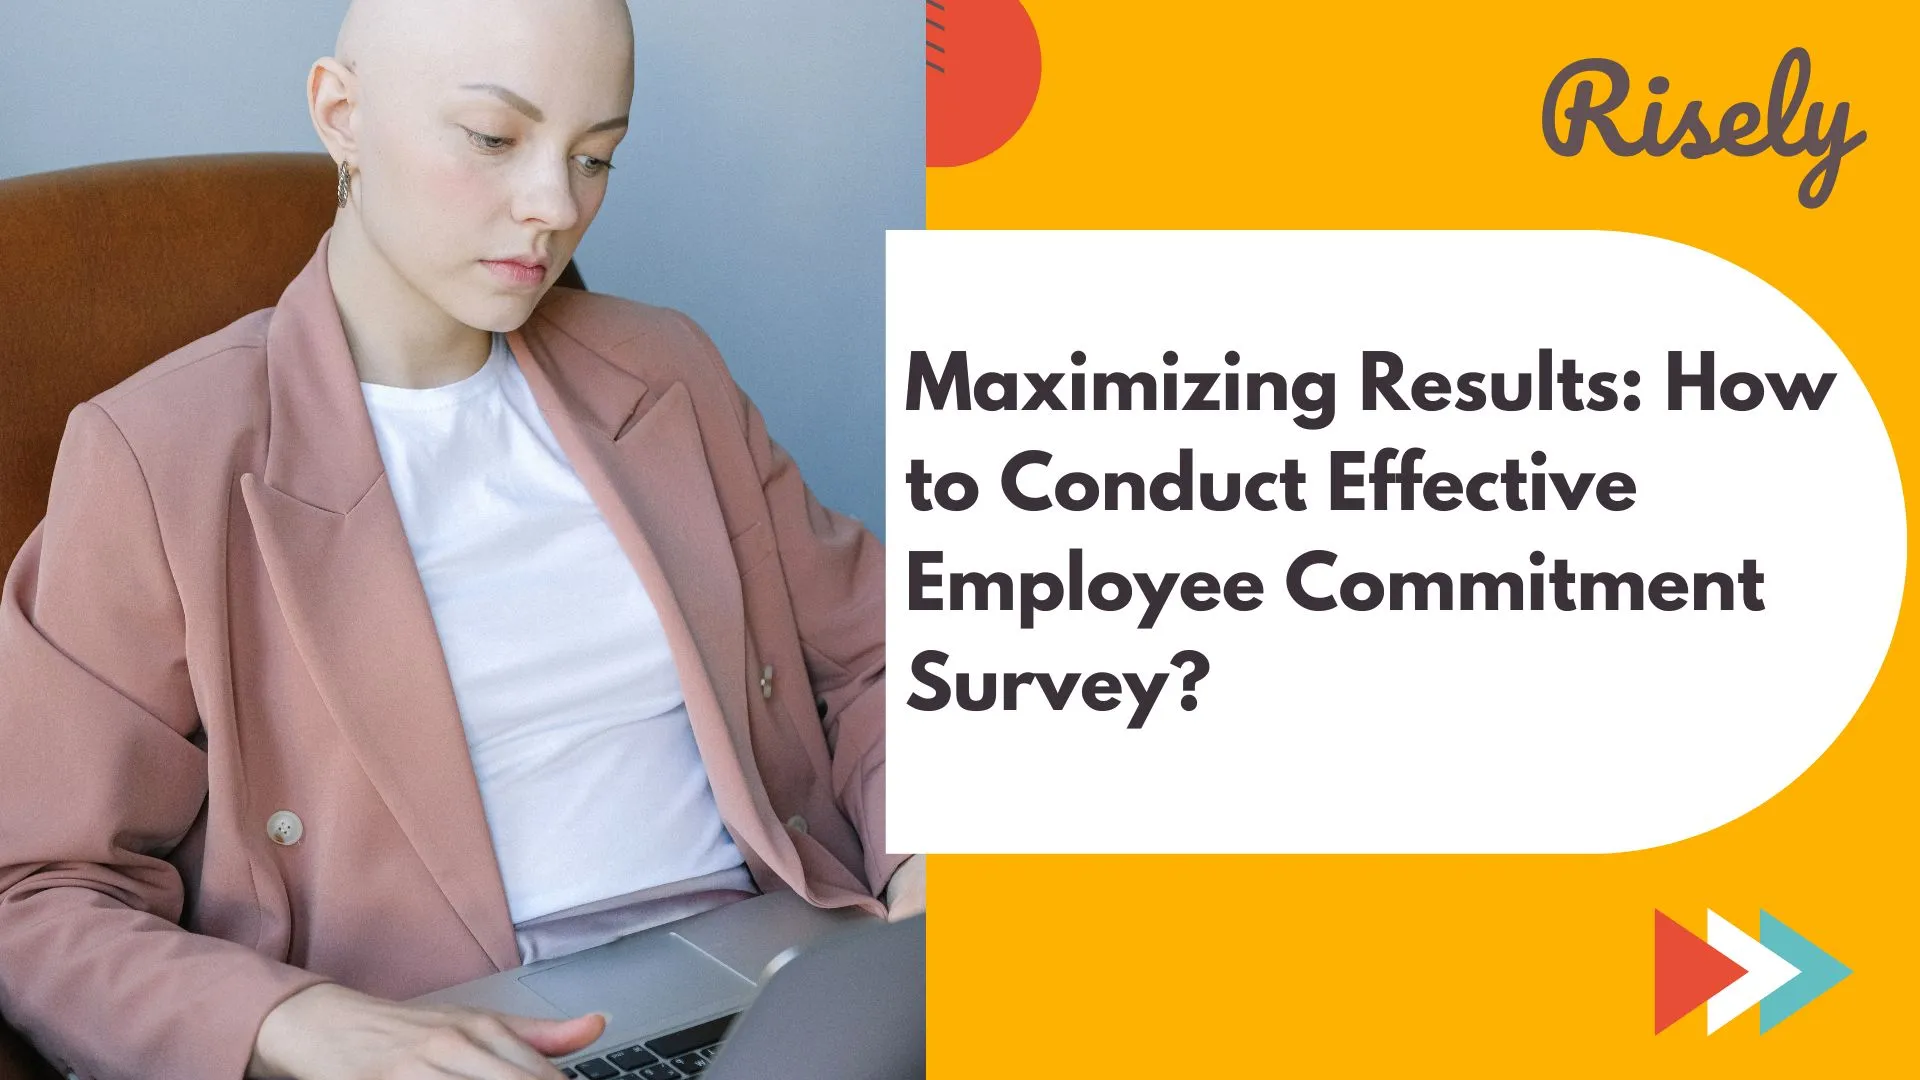 Maximizing Results: How to Conduct an Effective Employee Commitment Survey?